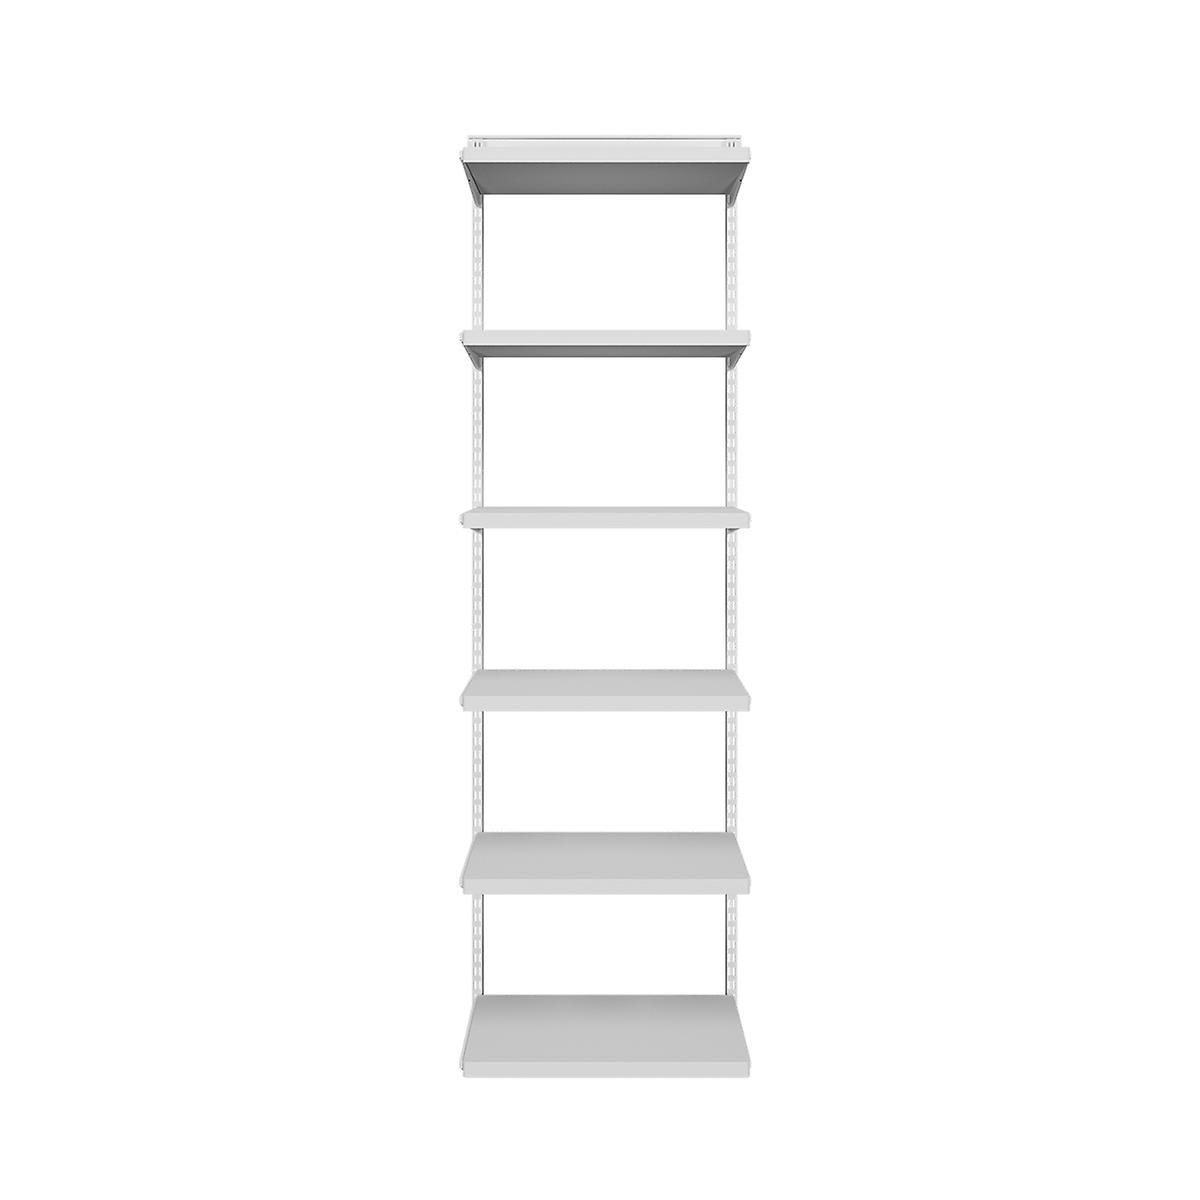 Elfa Décor 2' White Basic Shelving Units for Anywhere | The Container Store